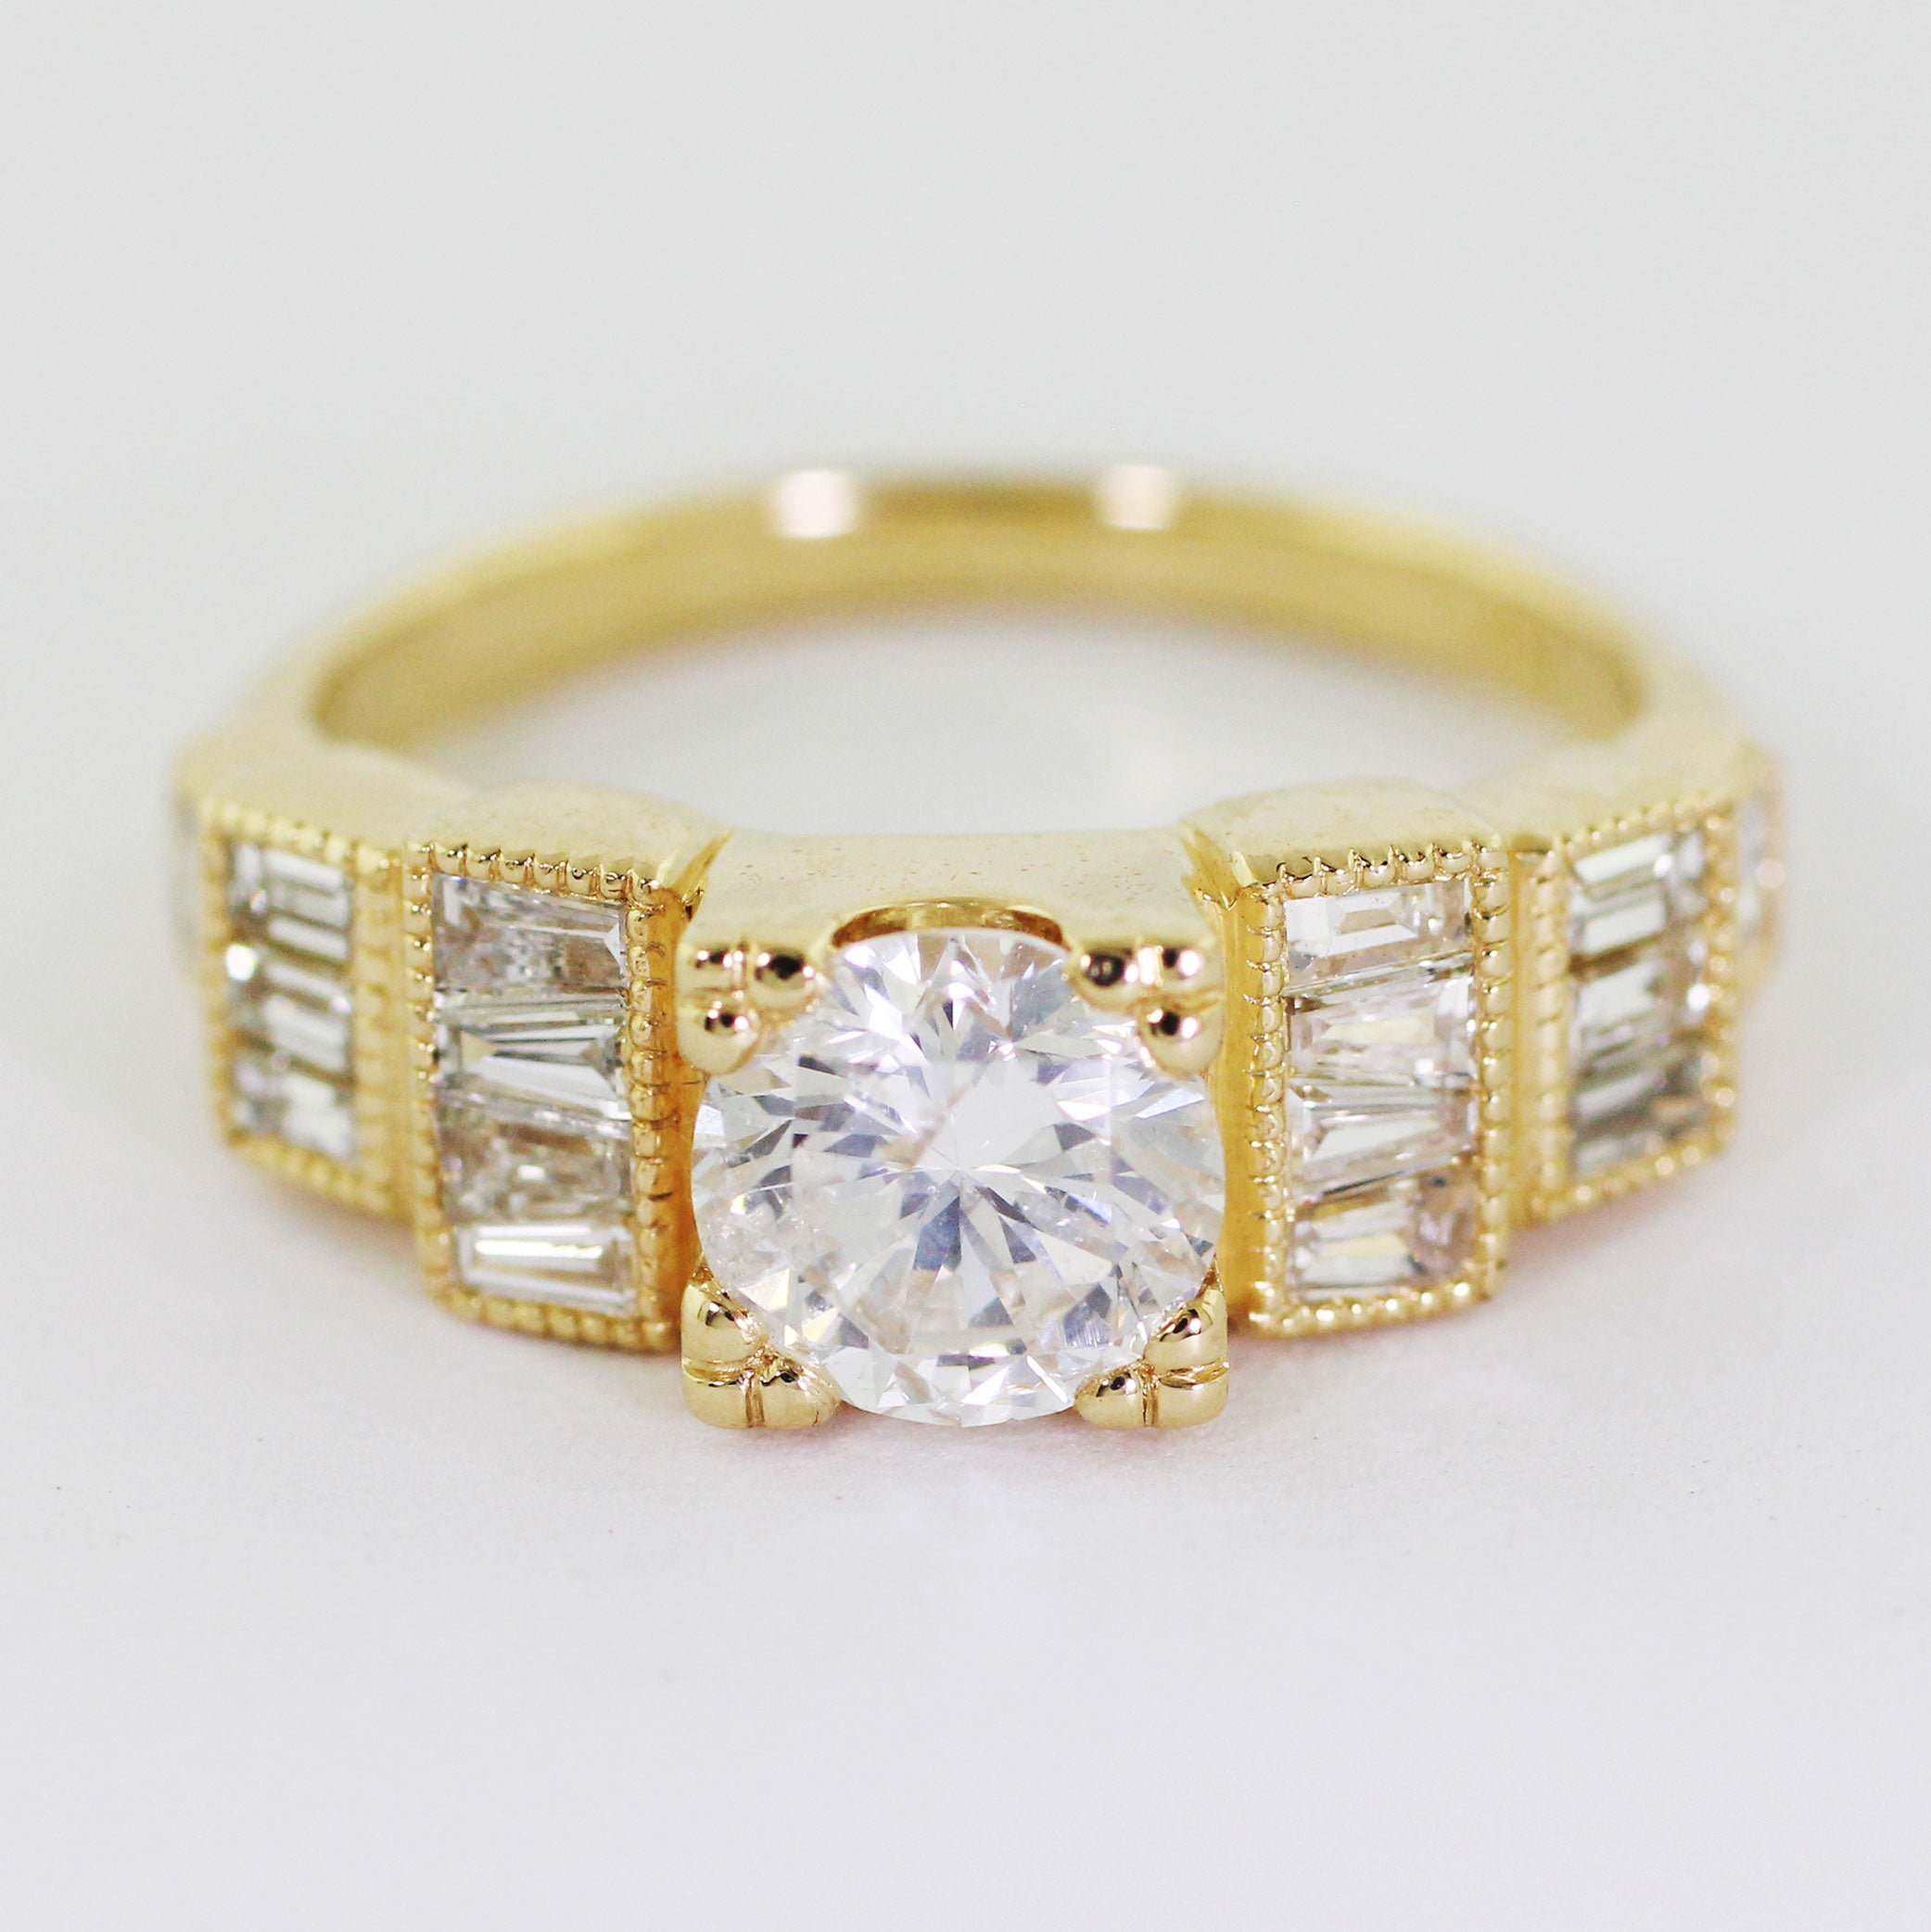 Custom 14k yellow gold Art Deco engagement ring with a prong-set center diamond and a series of heirloom diamonds channel-set along the band in a step-down pattern